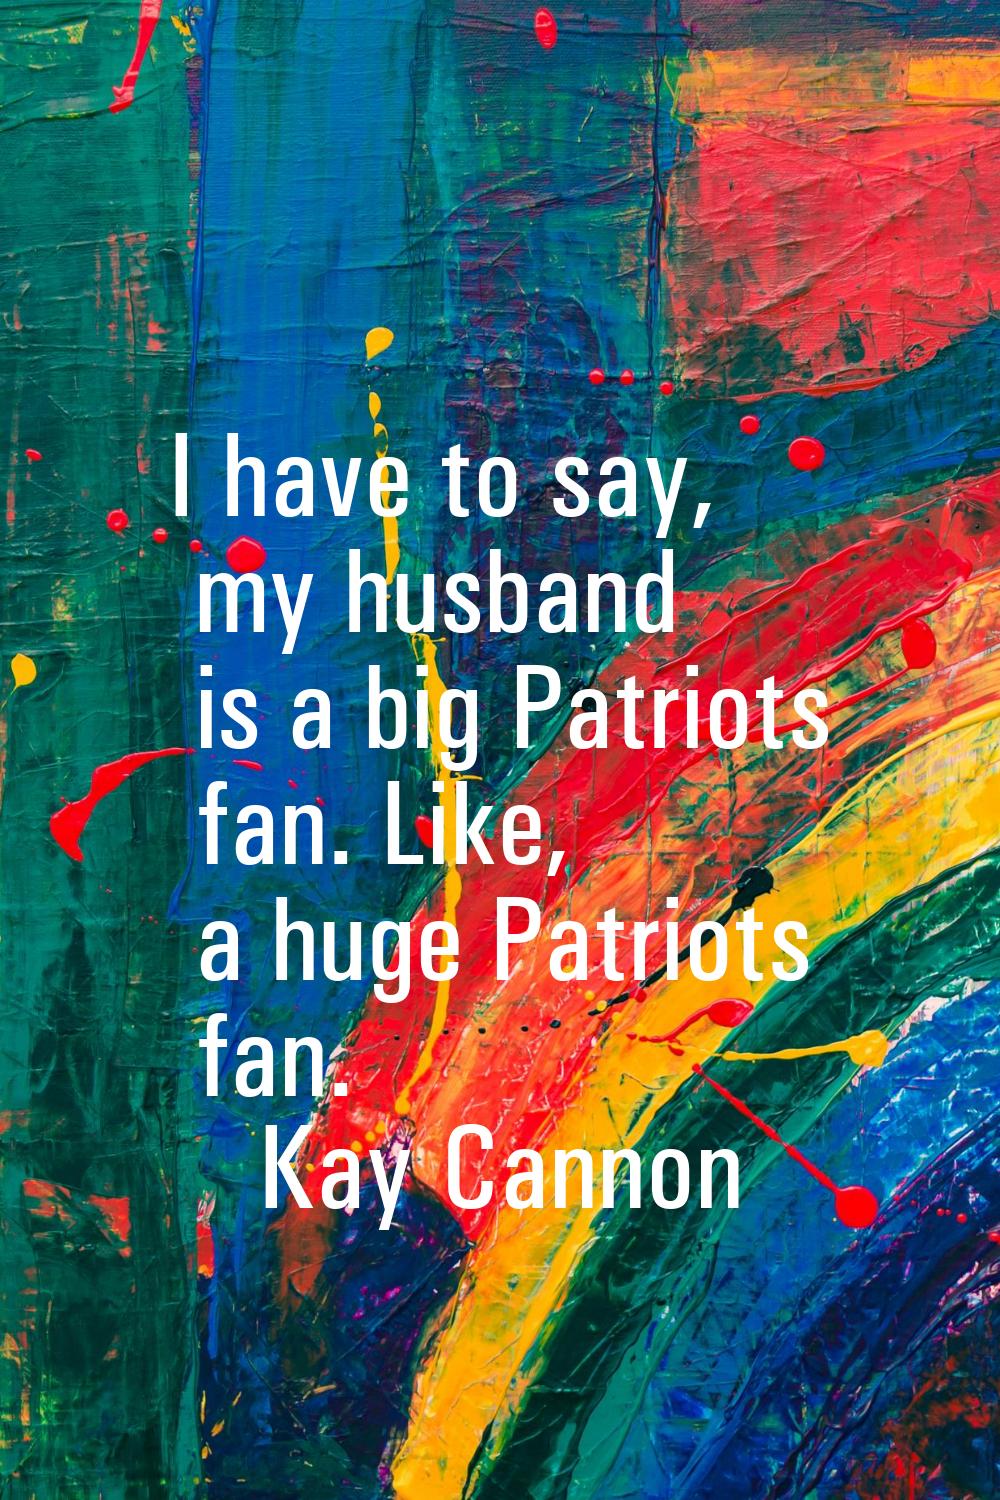 I have to say, my husband is a big Patriots fan. Like, a huge Patriots fan.